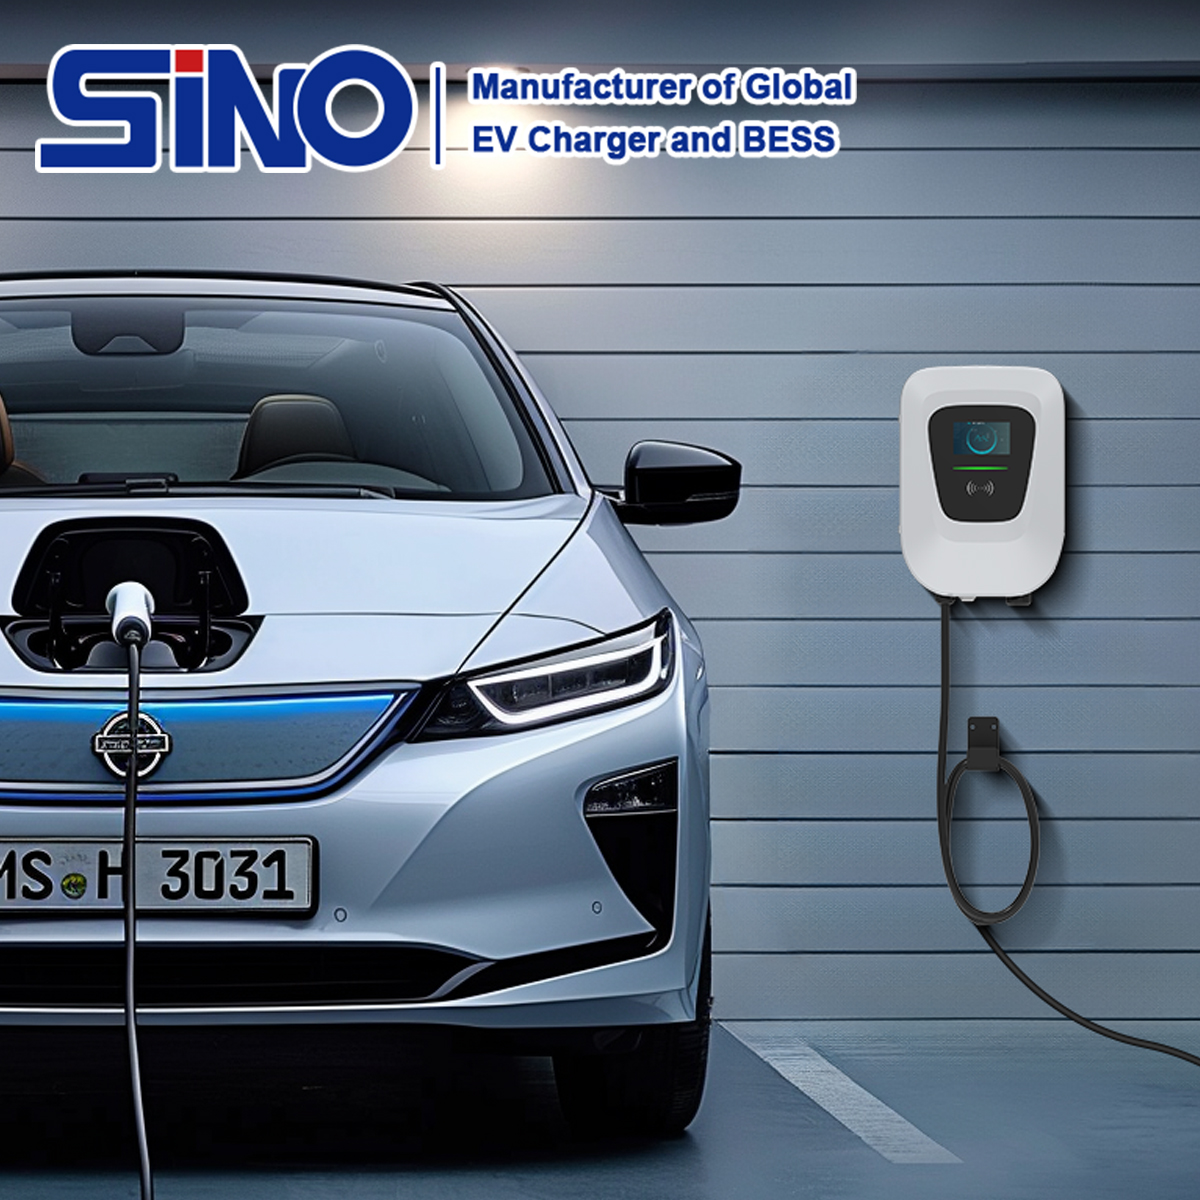 Ev Charger at Home